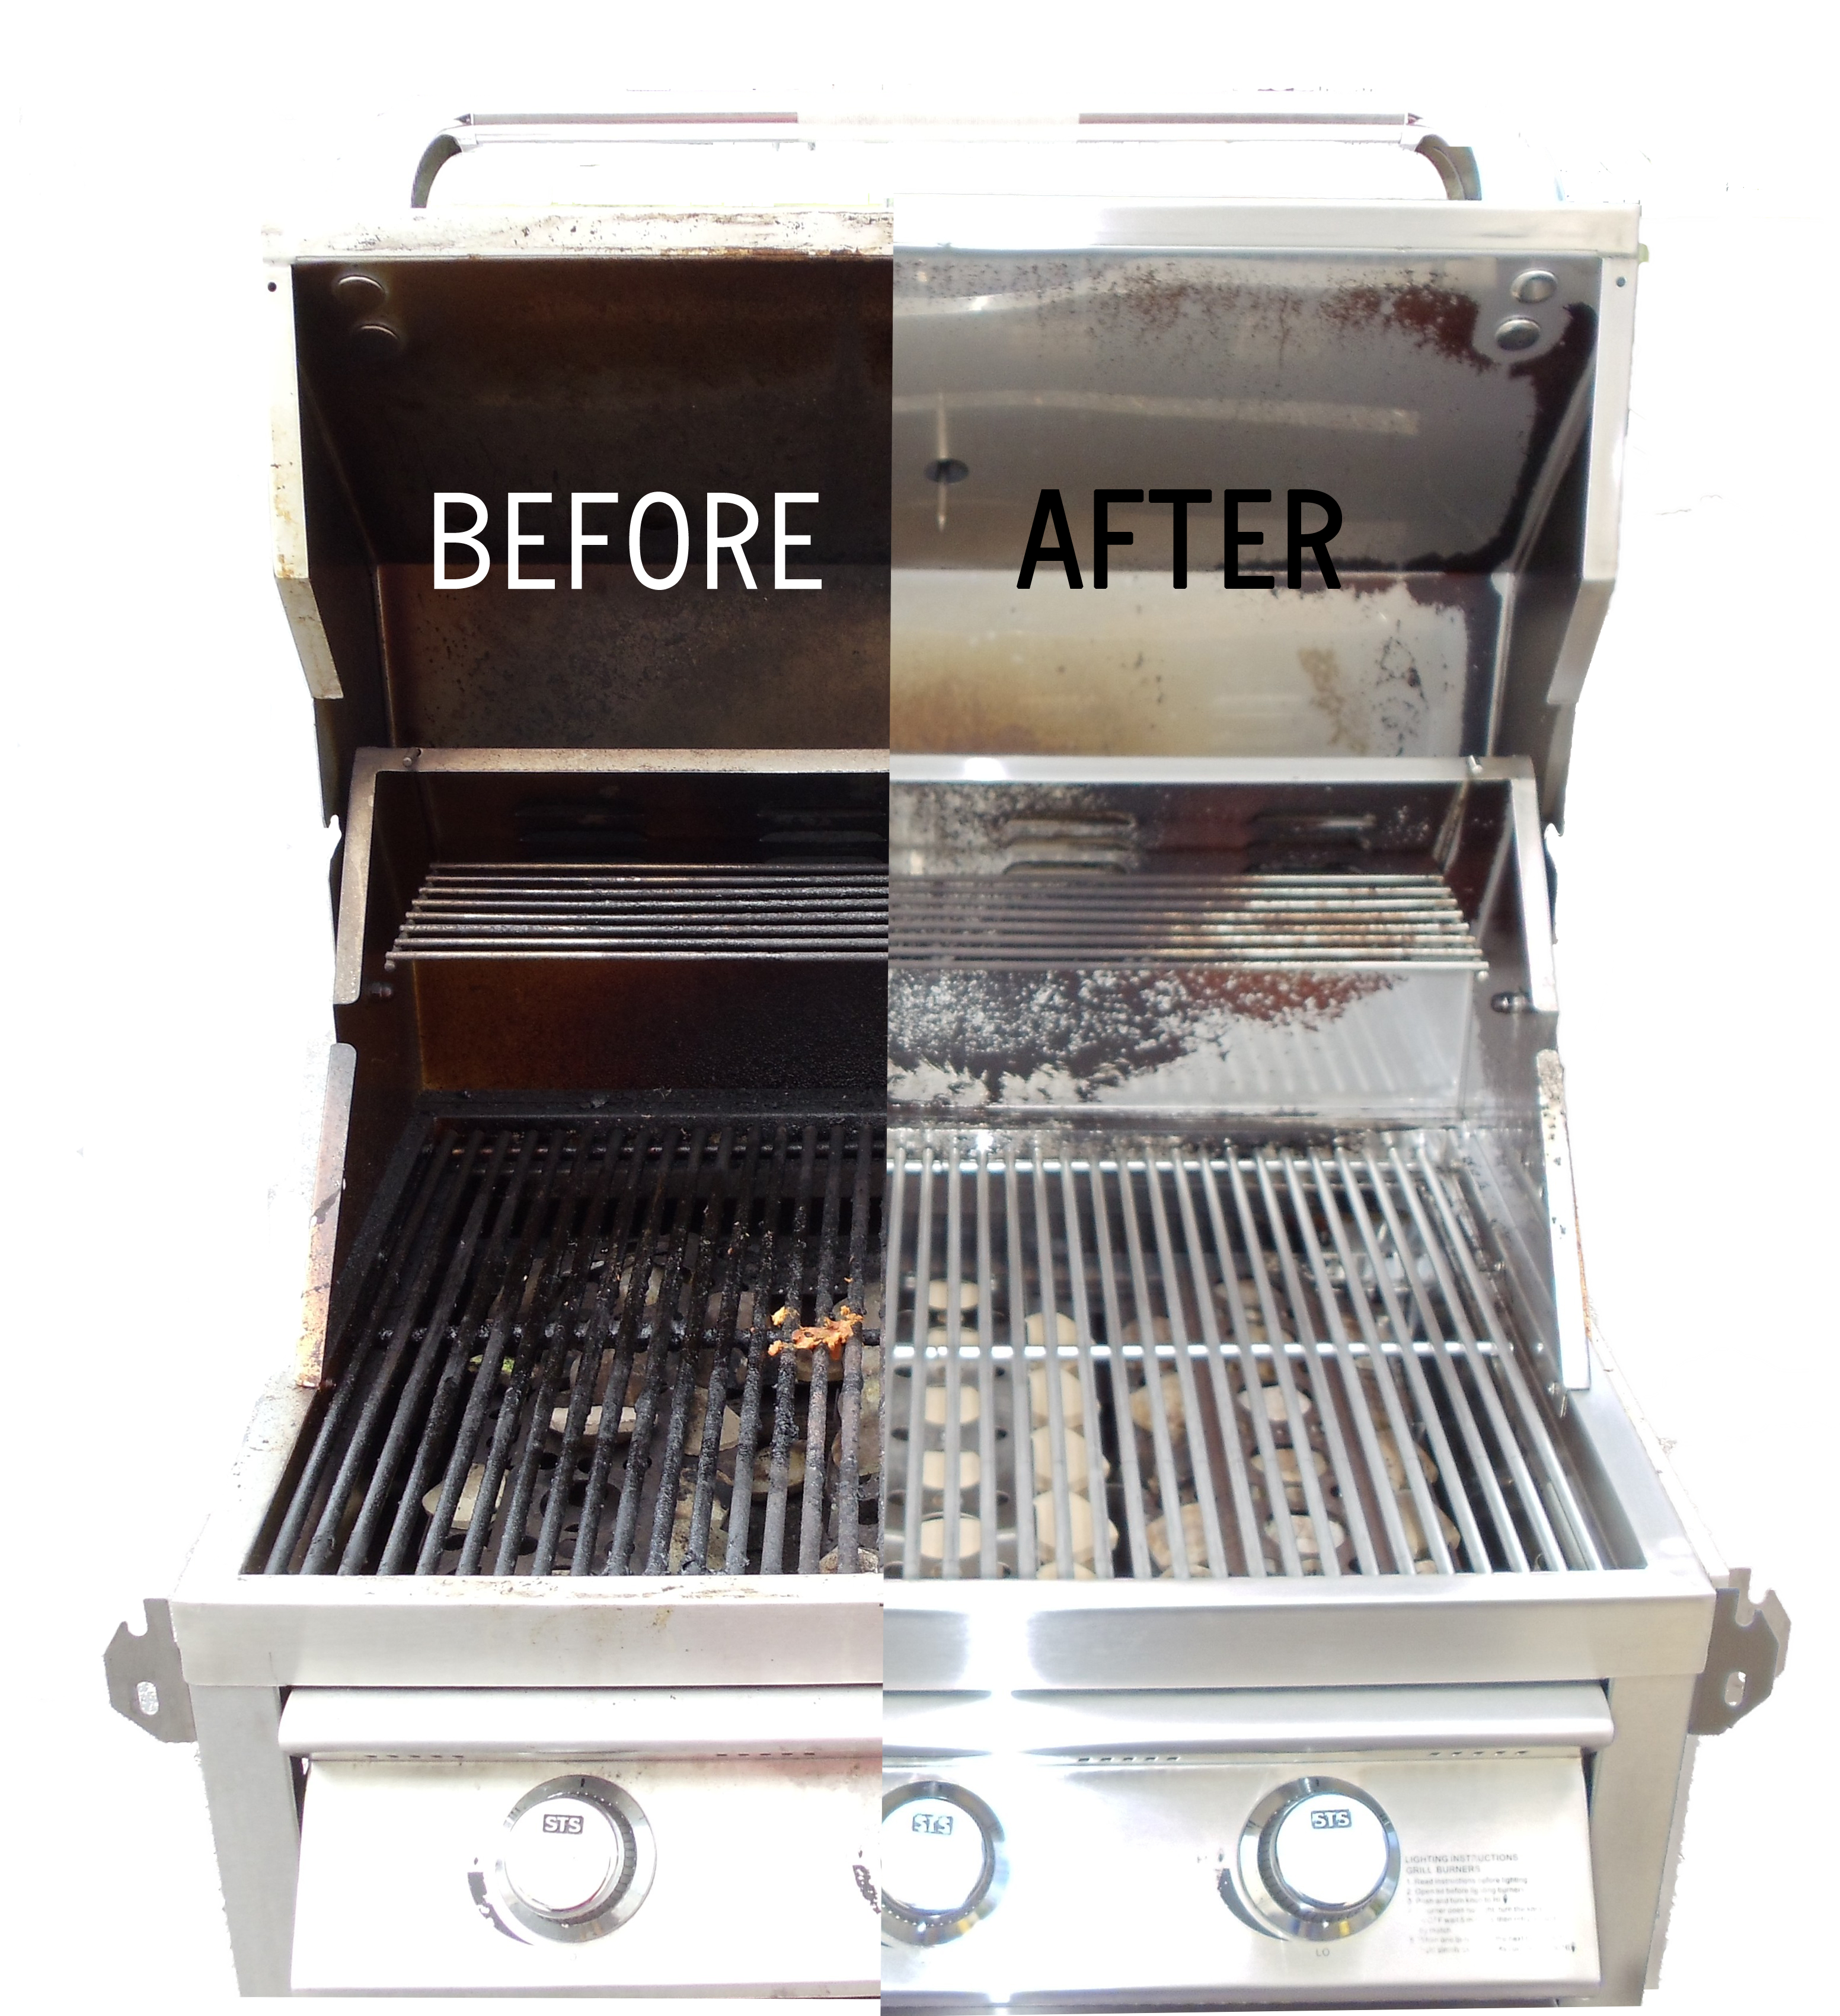 Before and after cleaning a grill